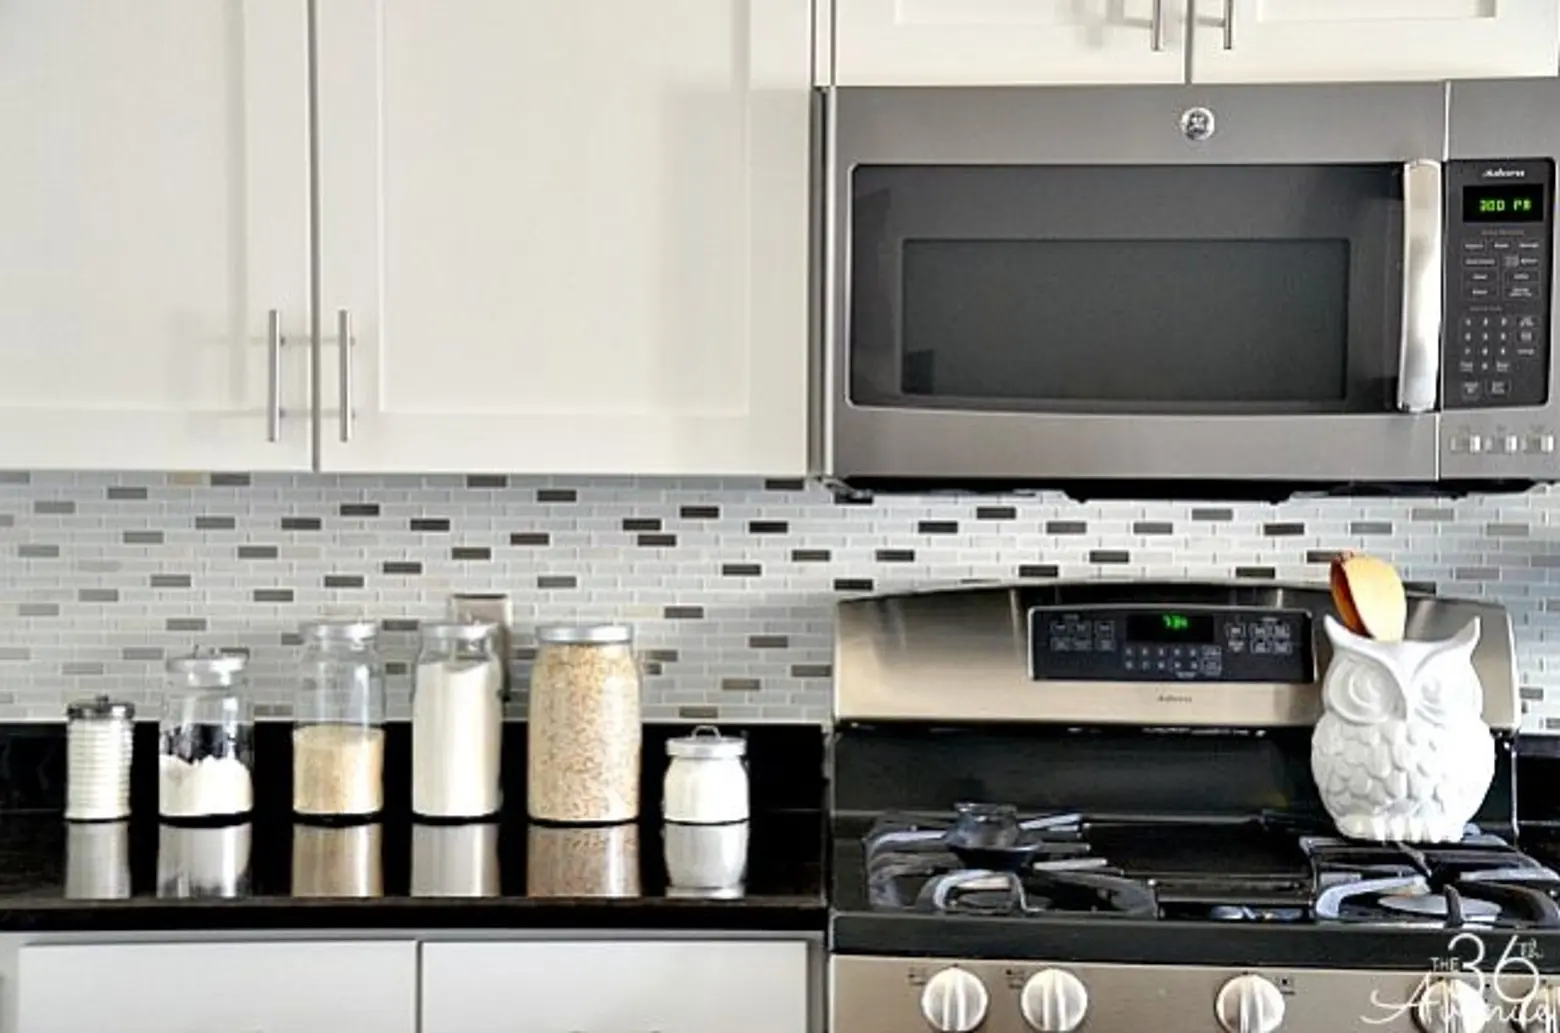 7 things you need to keep your kitchen organized